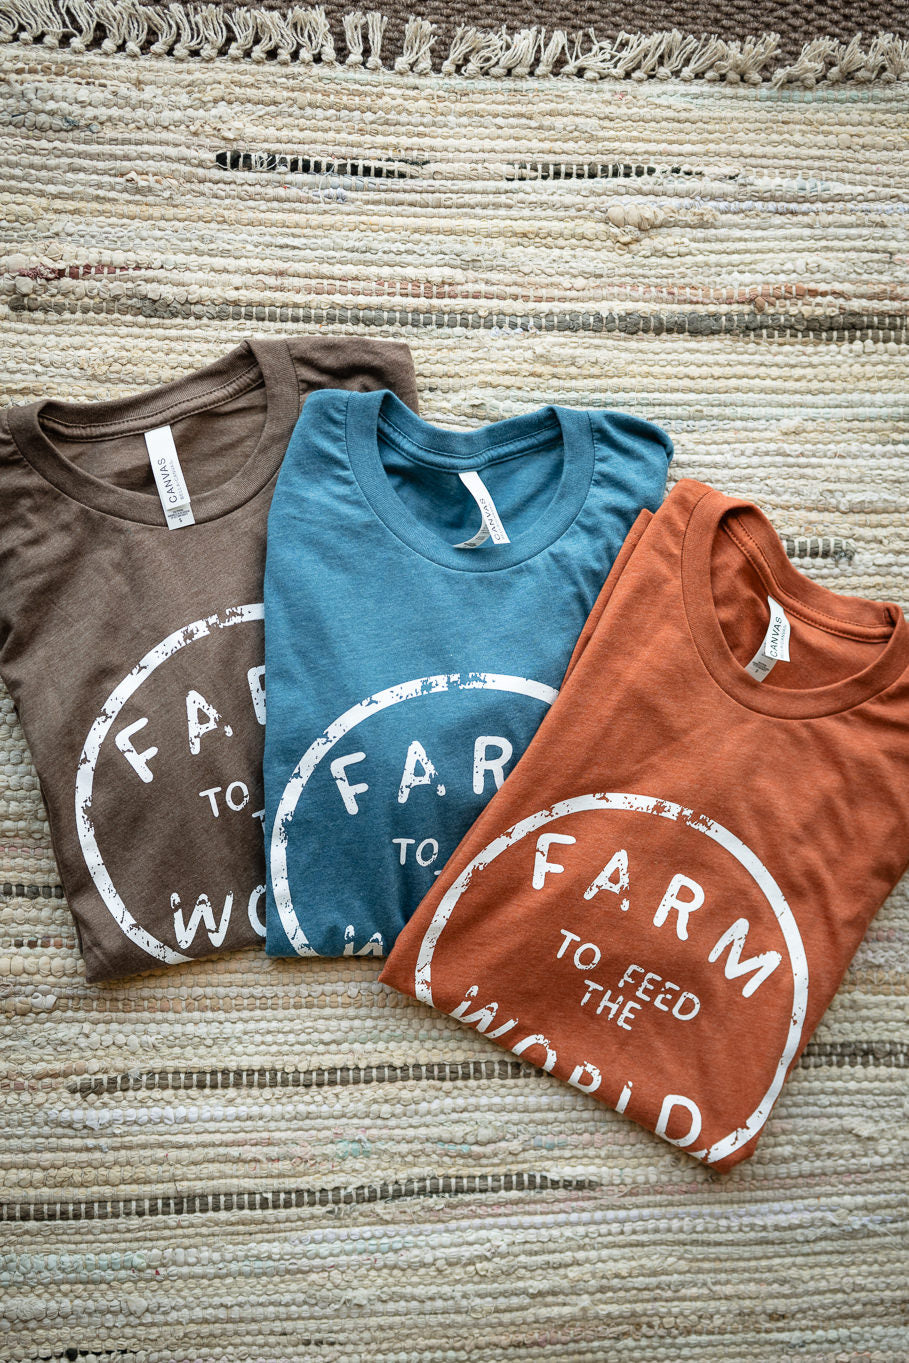 Feed the World Graphic Tee in Heather Brown | Sizes S - 3XL